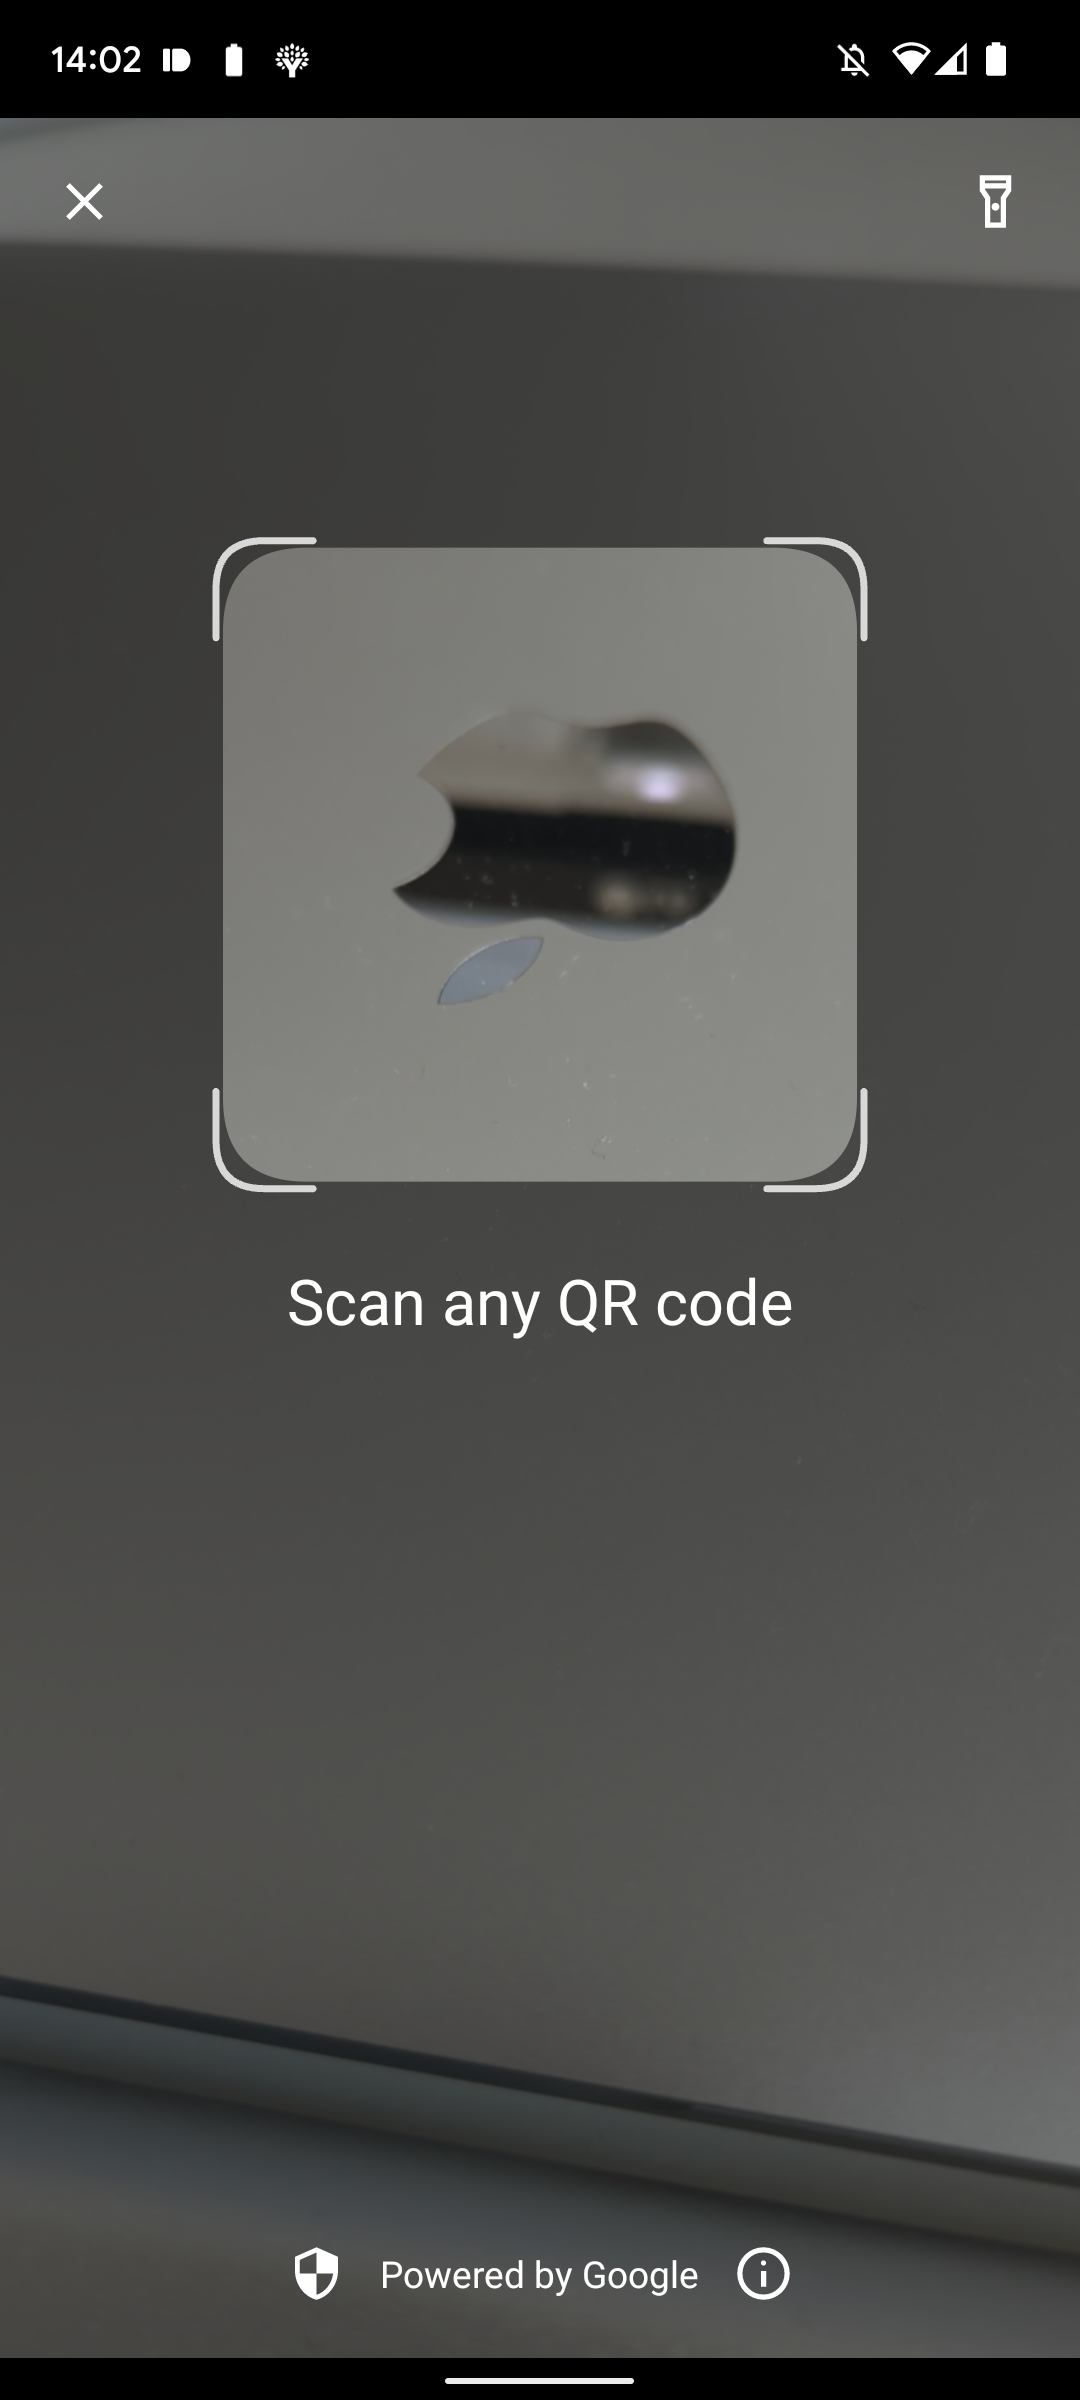 Android 13's QR code scanner's viewfinder